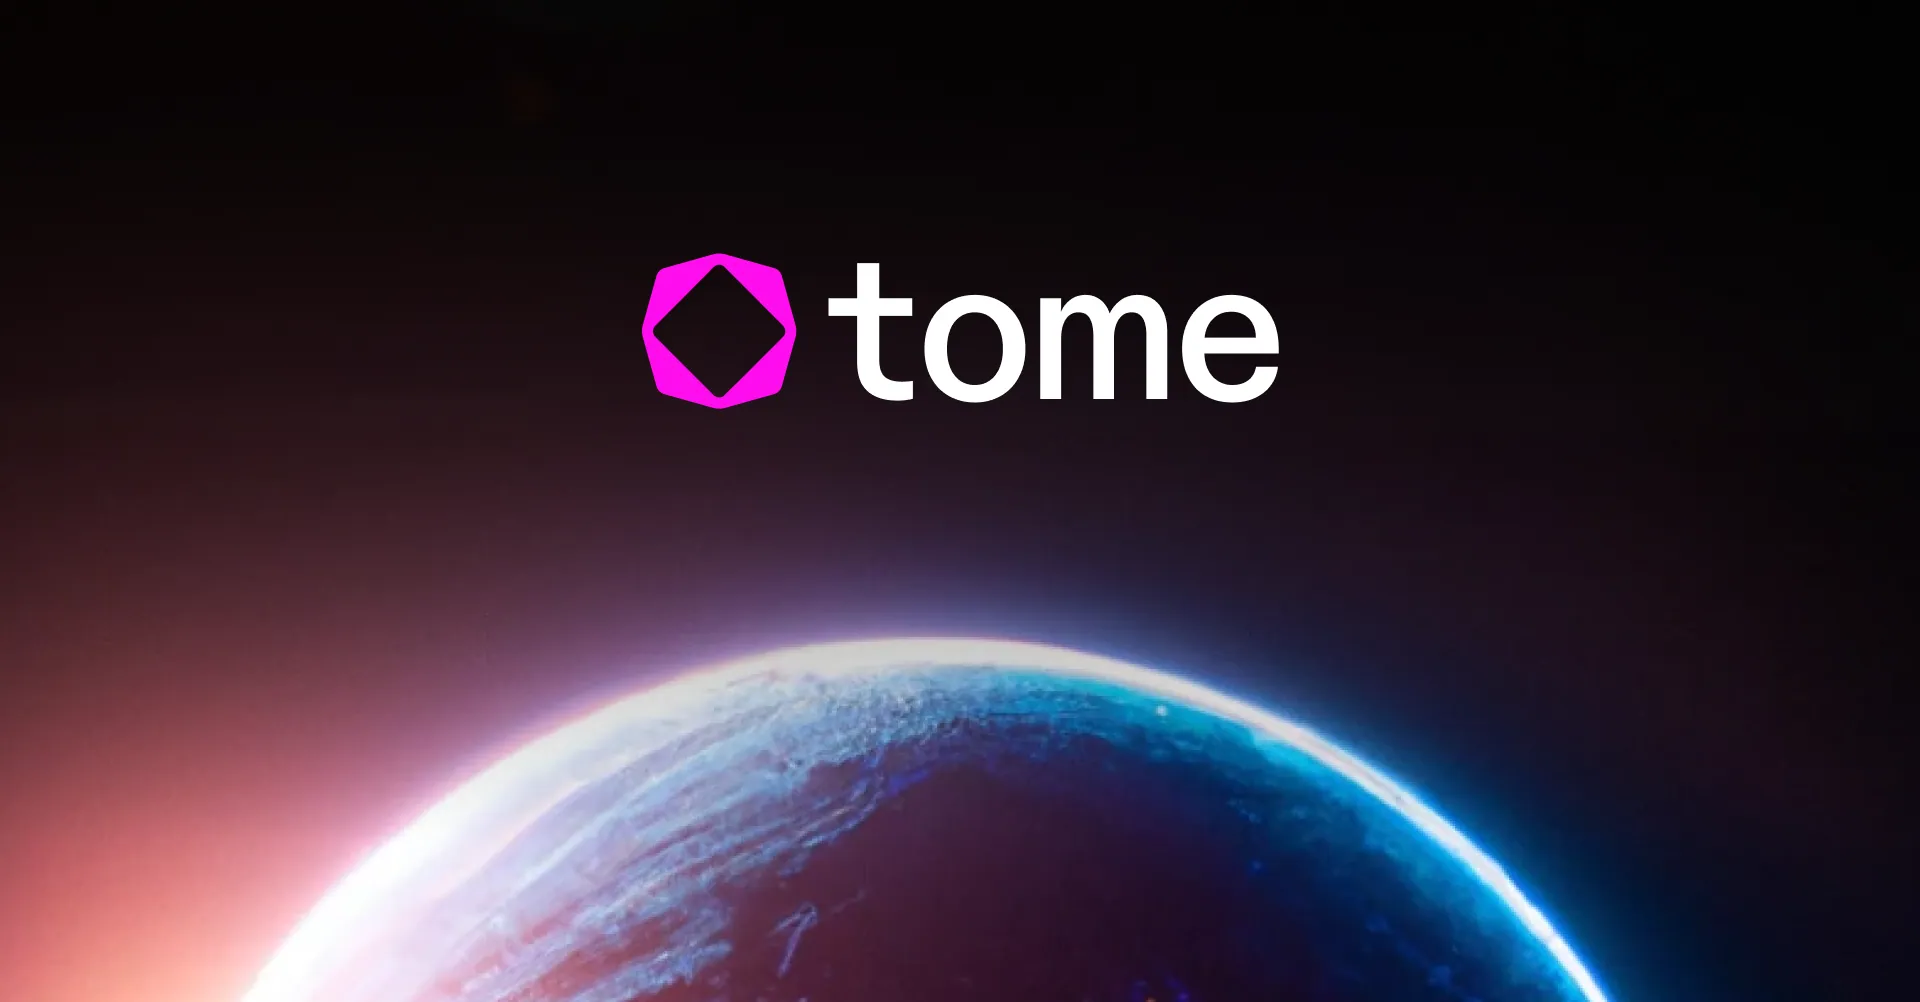 How To Download Tome App For iPhone?